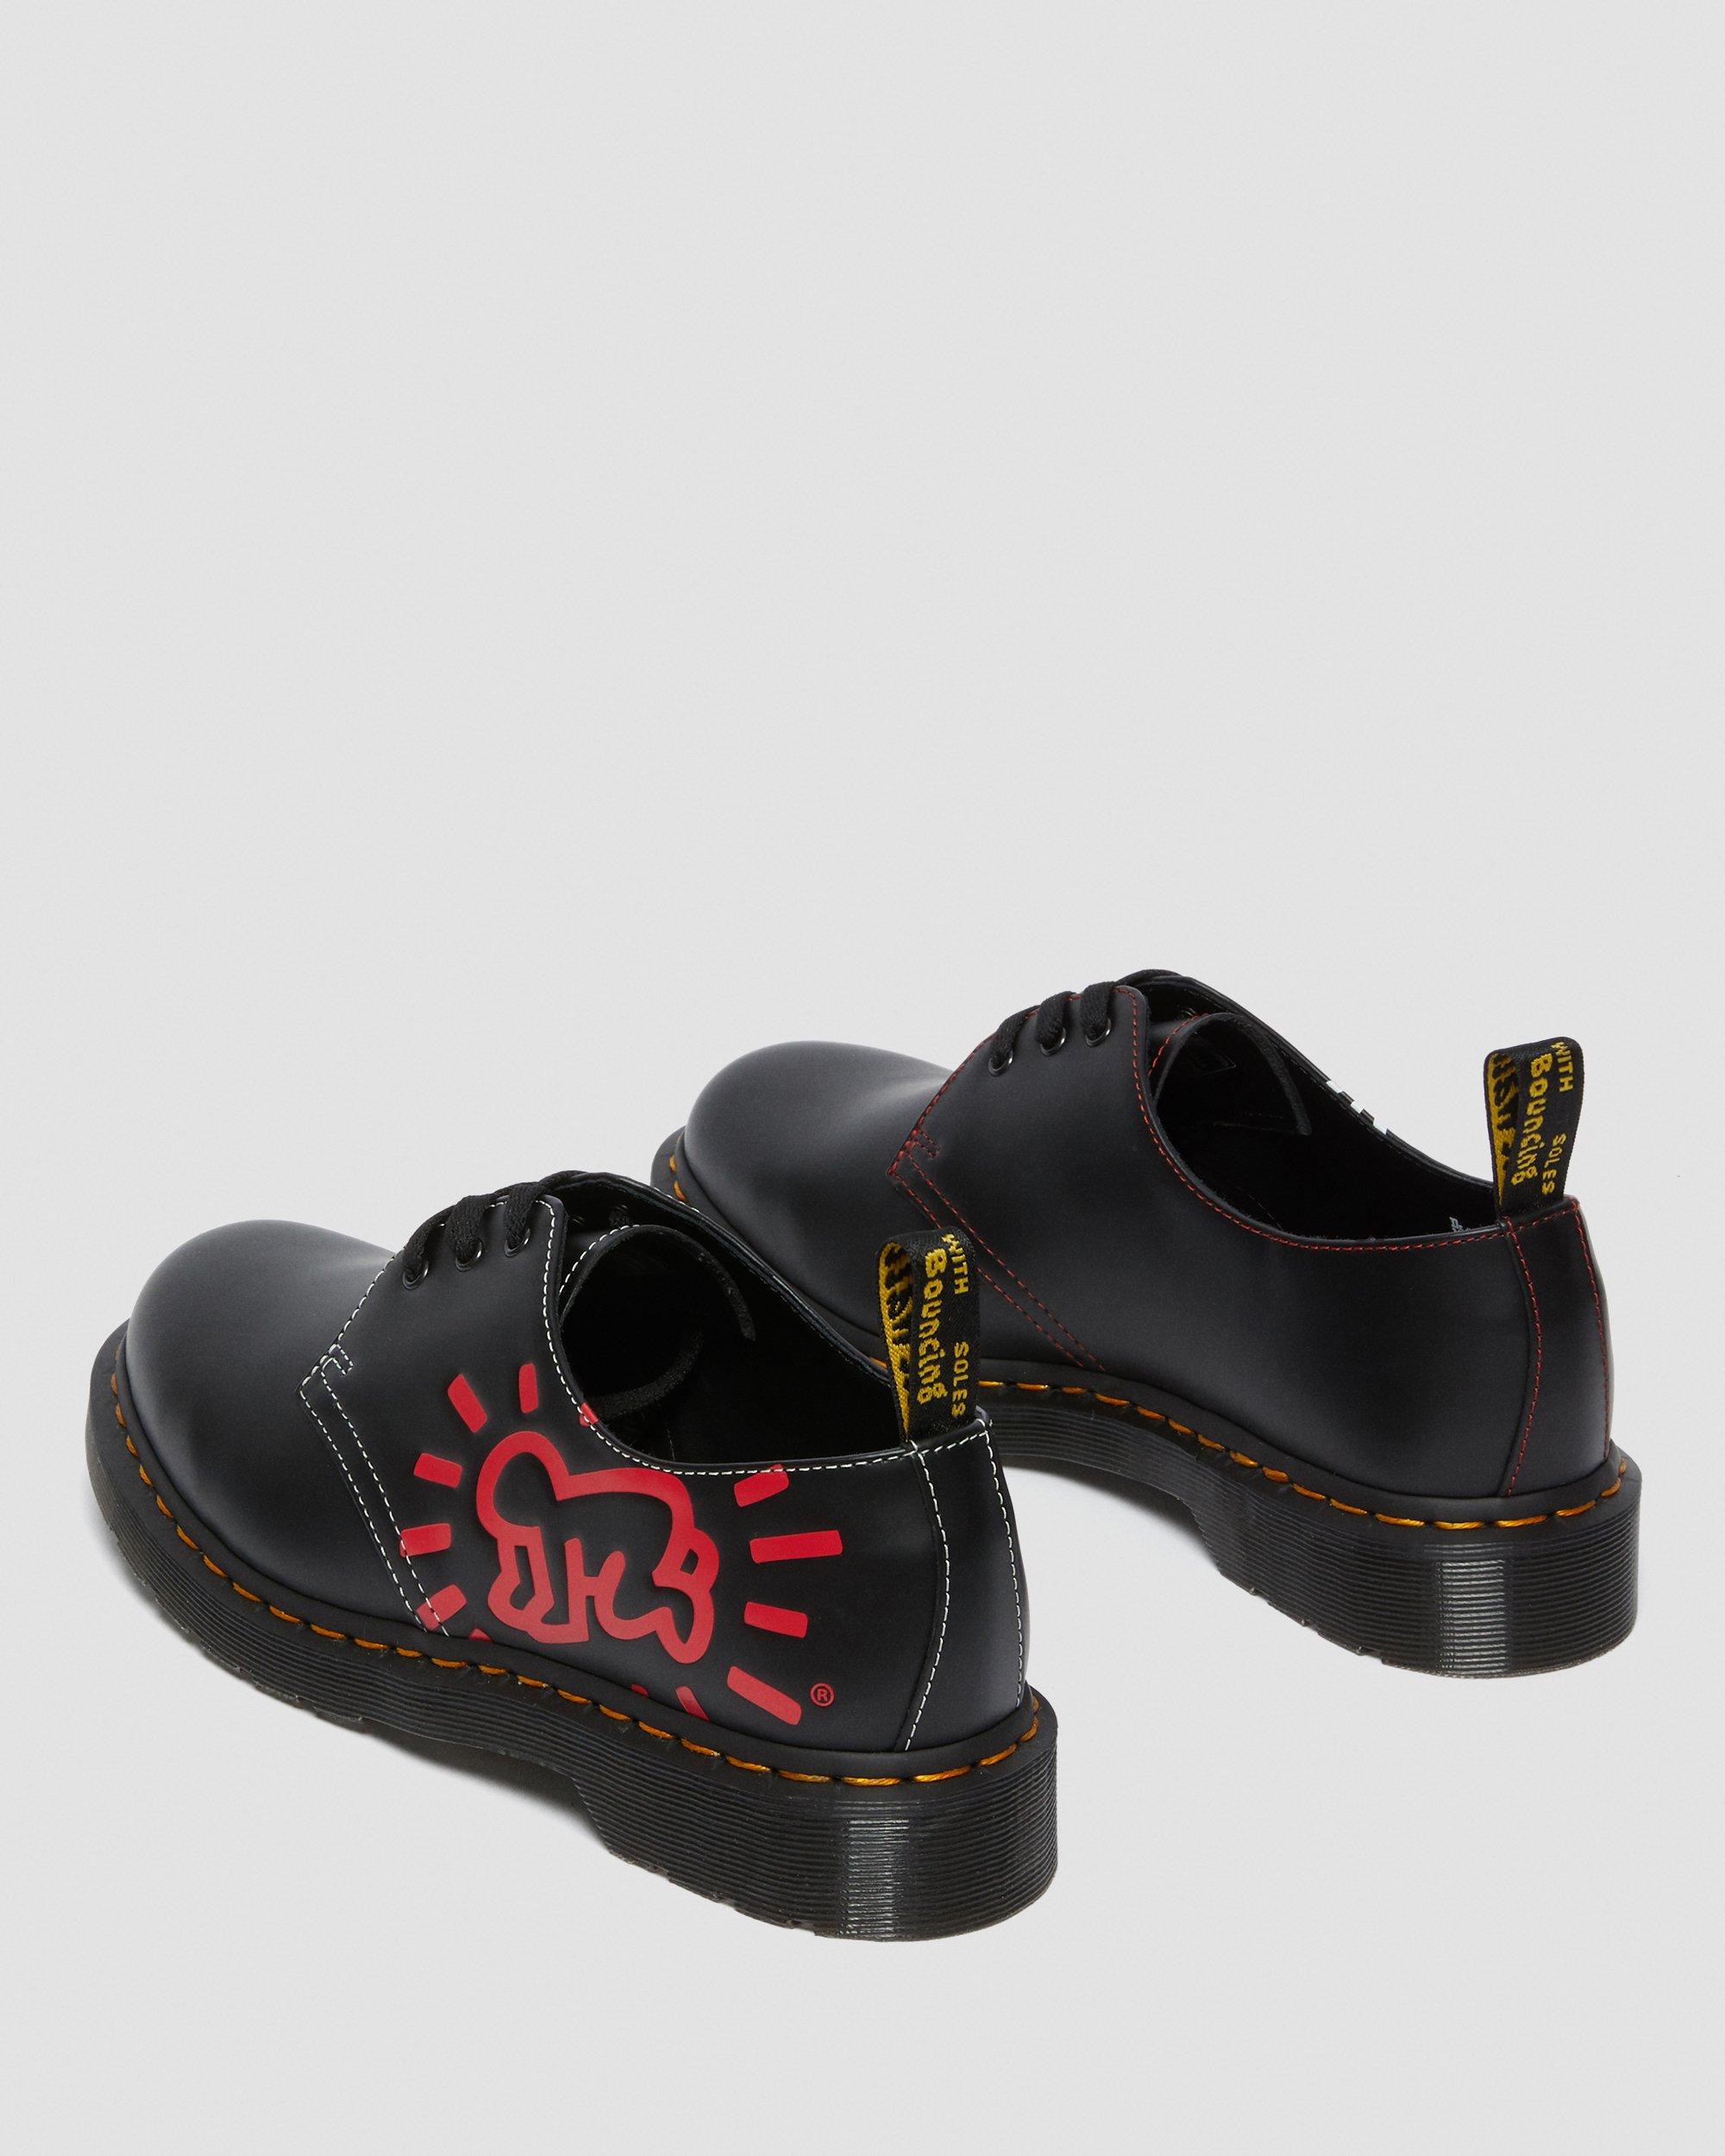 Keith Haring 1461 Smooth Leather Oxford Shoes | Dr. Martens